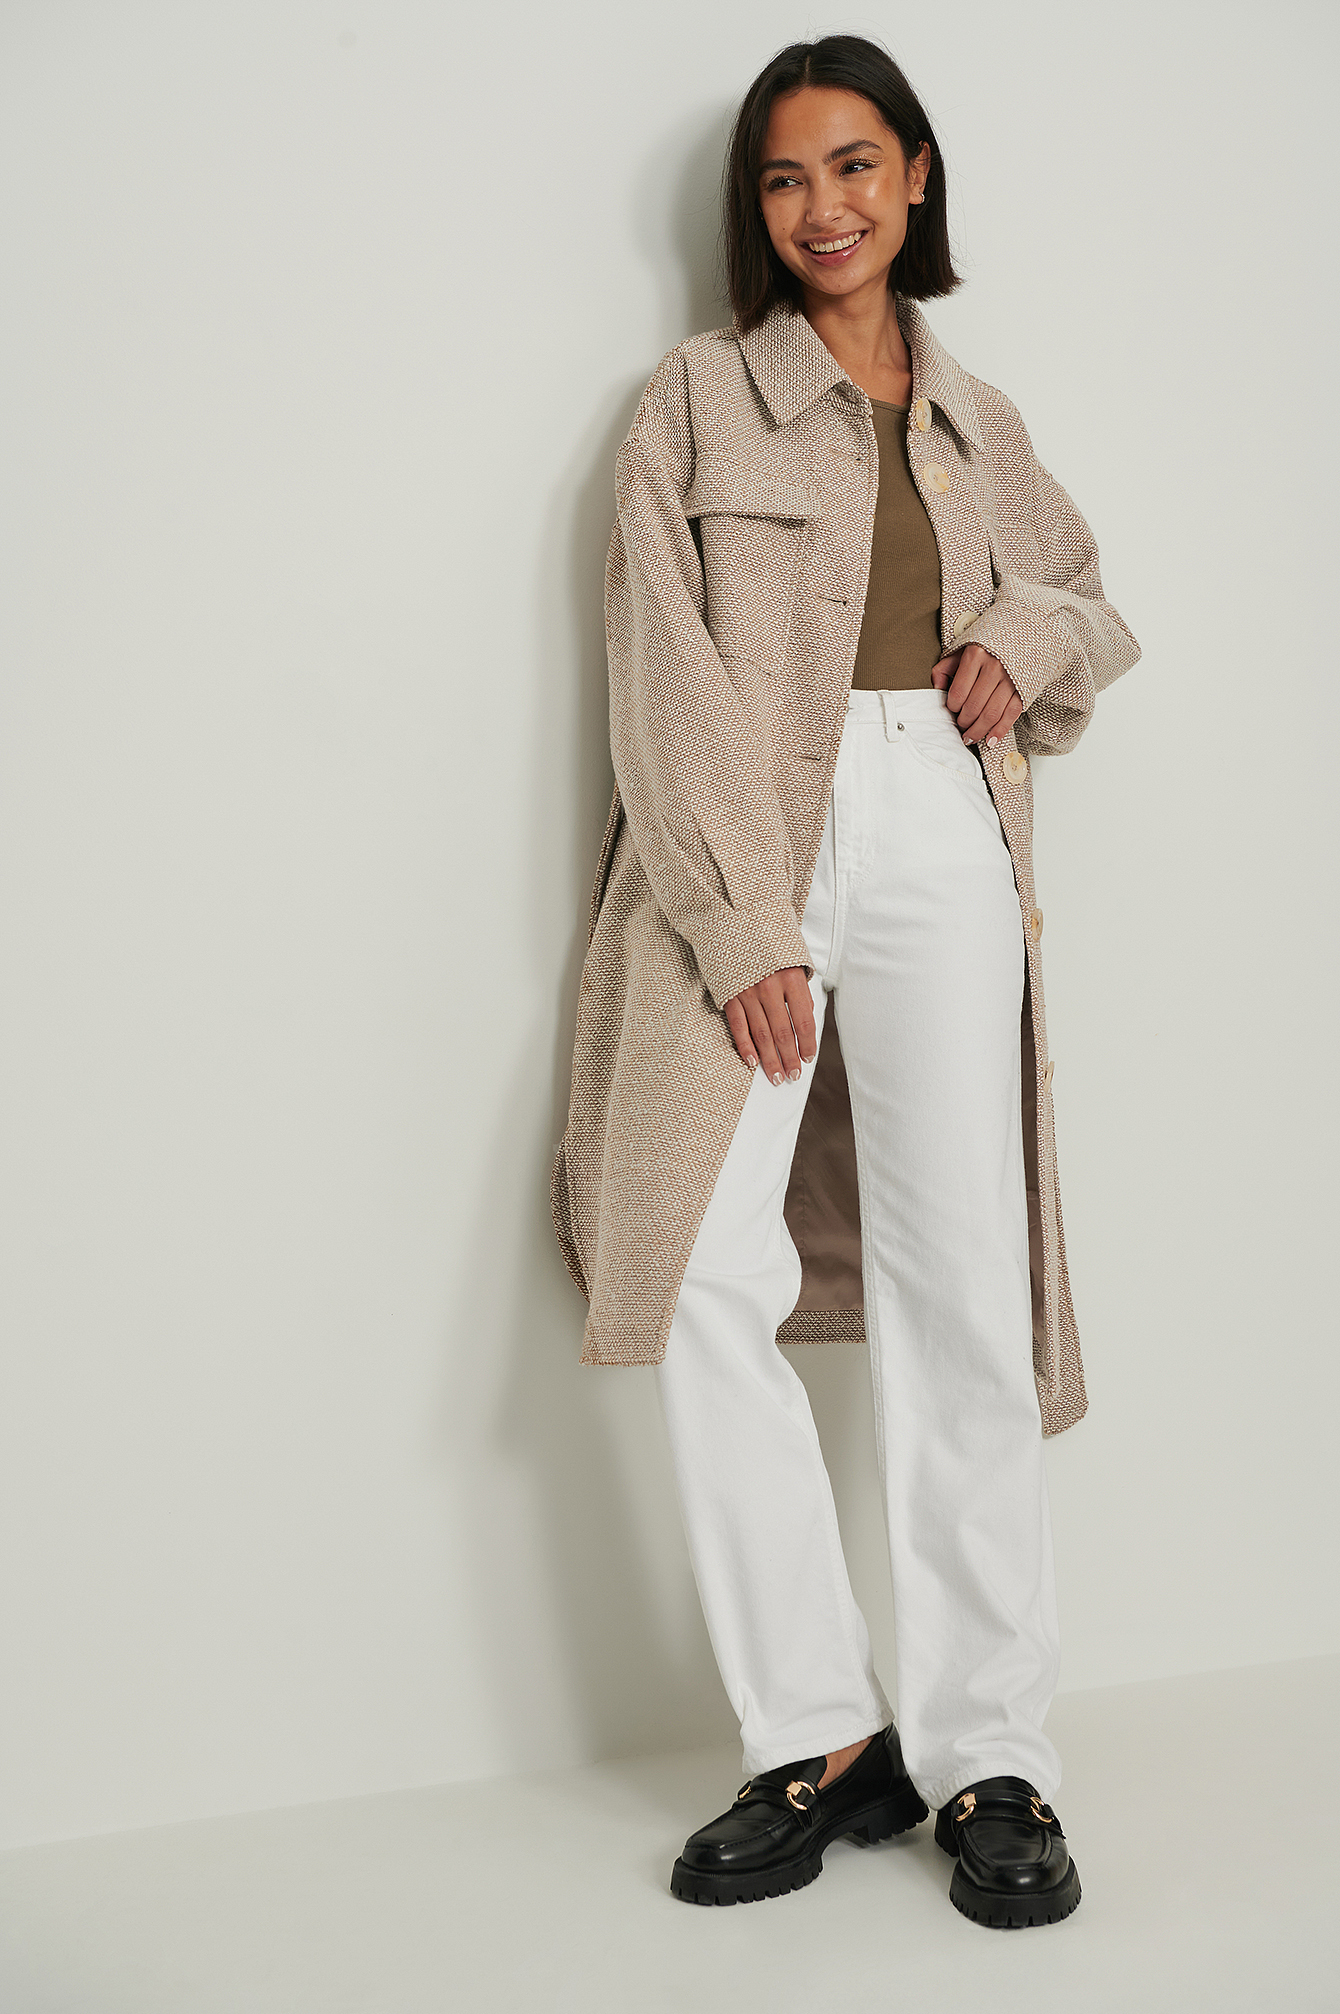 Chest Pocket Long Overshirt Outfit.